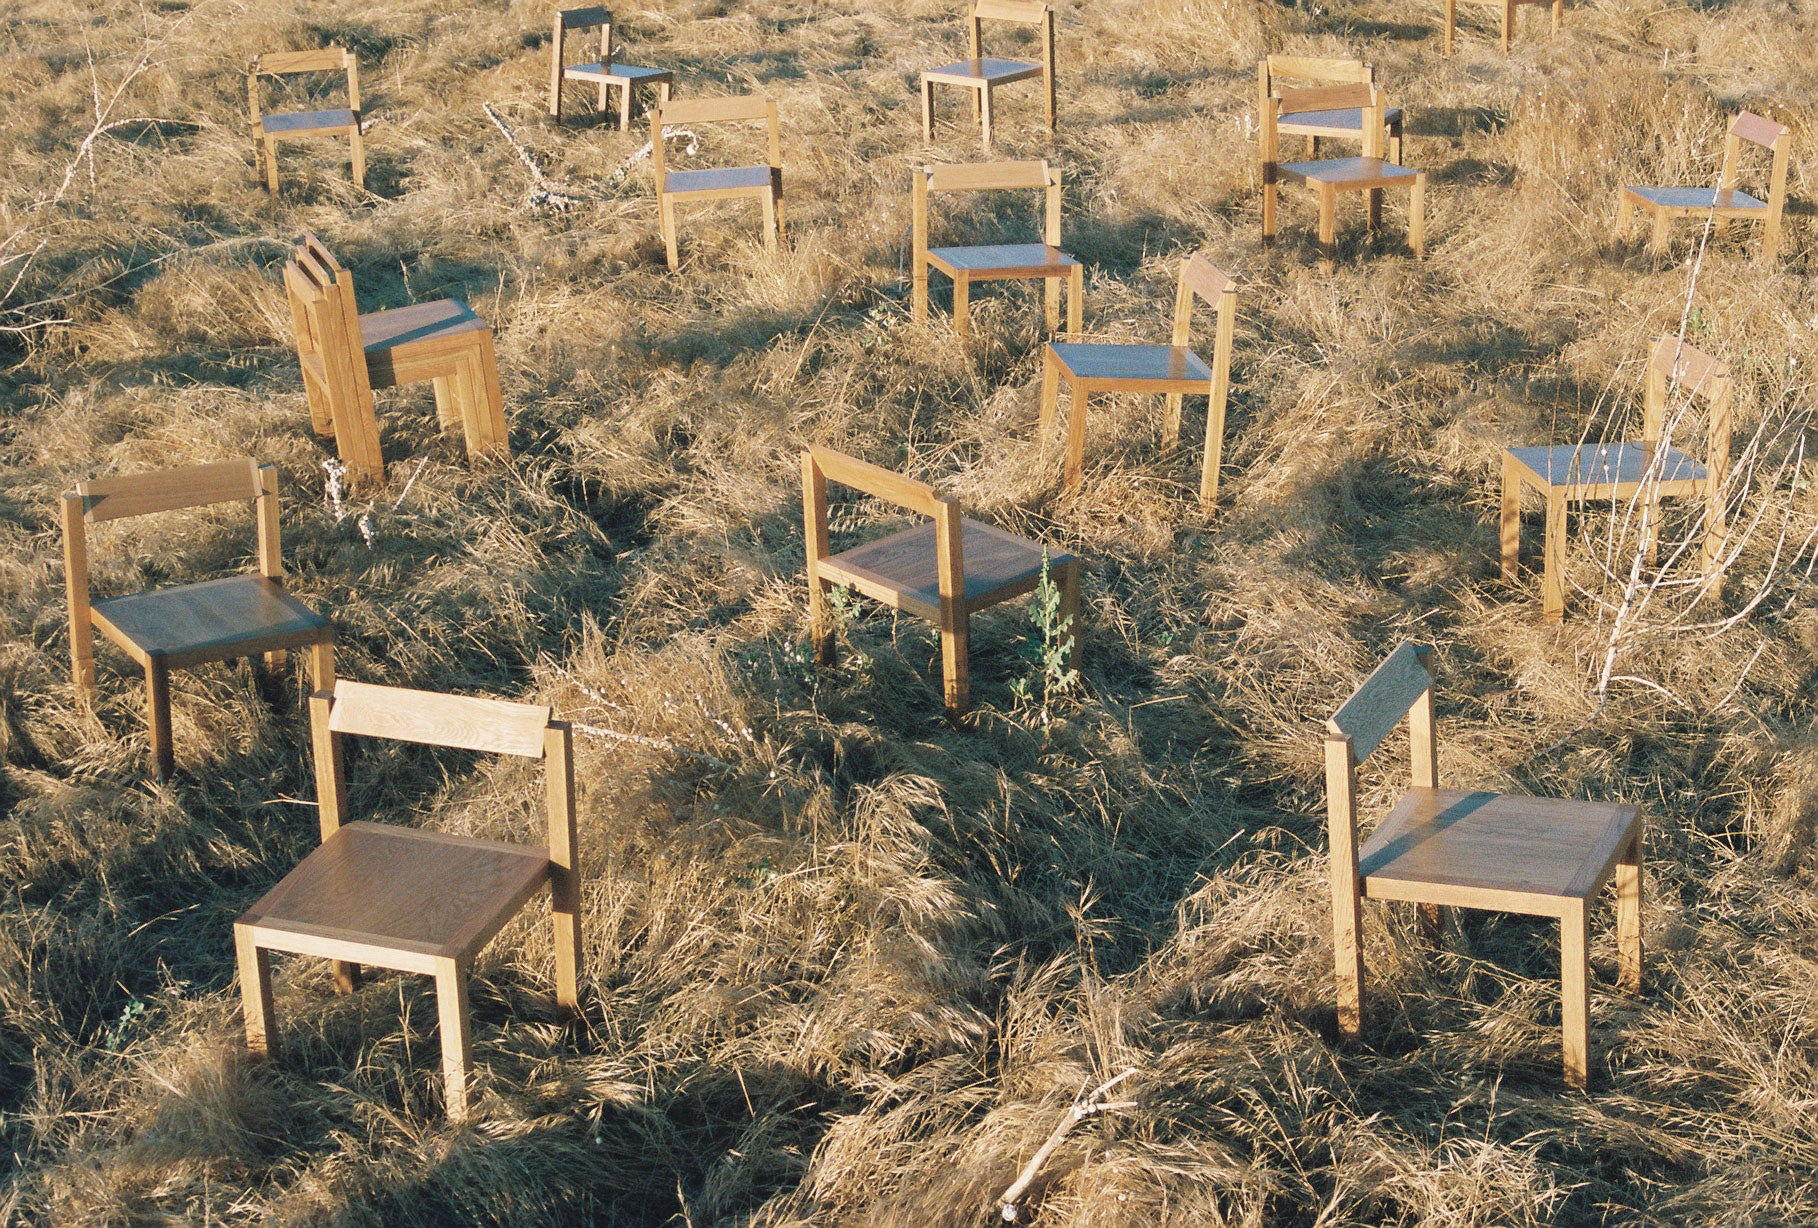 An assortment of Anything Chairs arranged in grassland